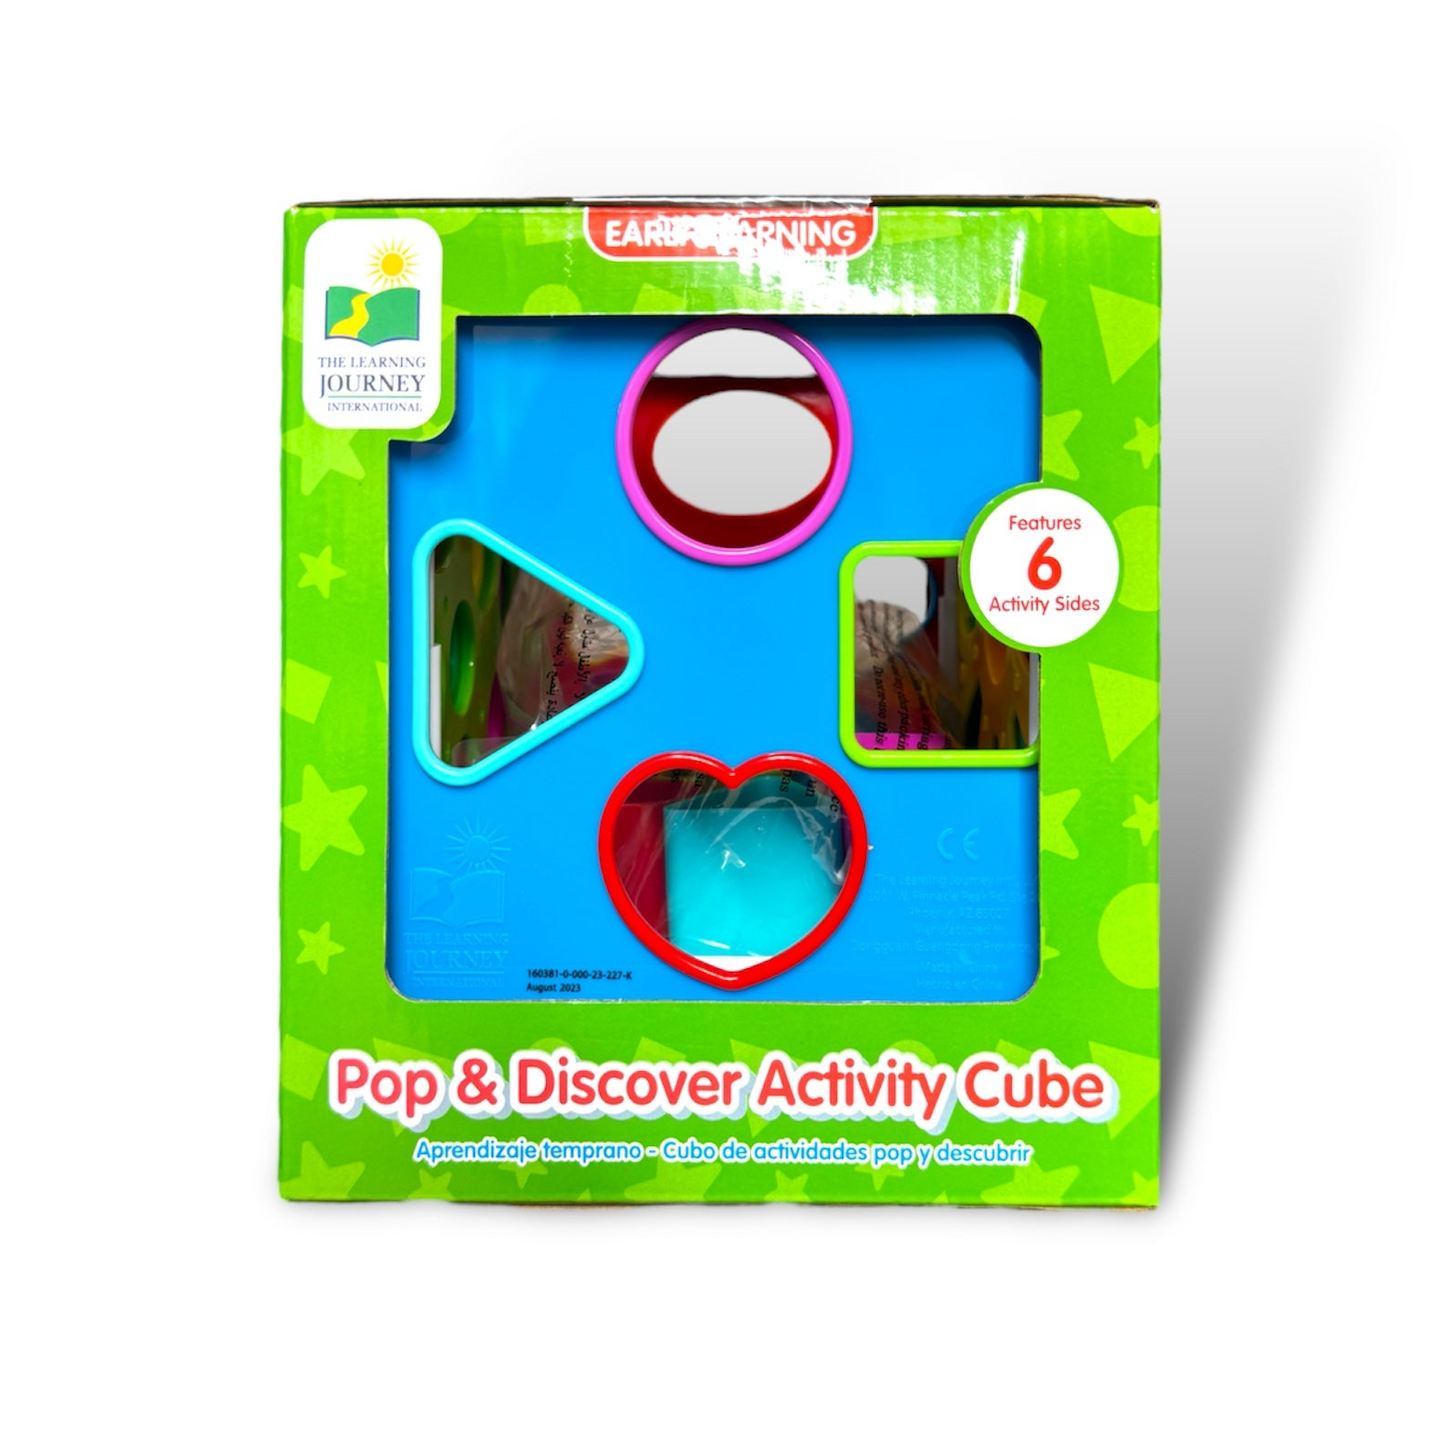 Pop & Discovery Activity Cube